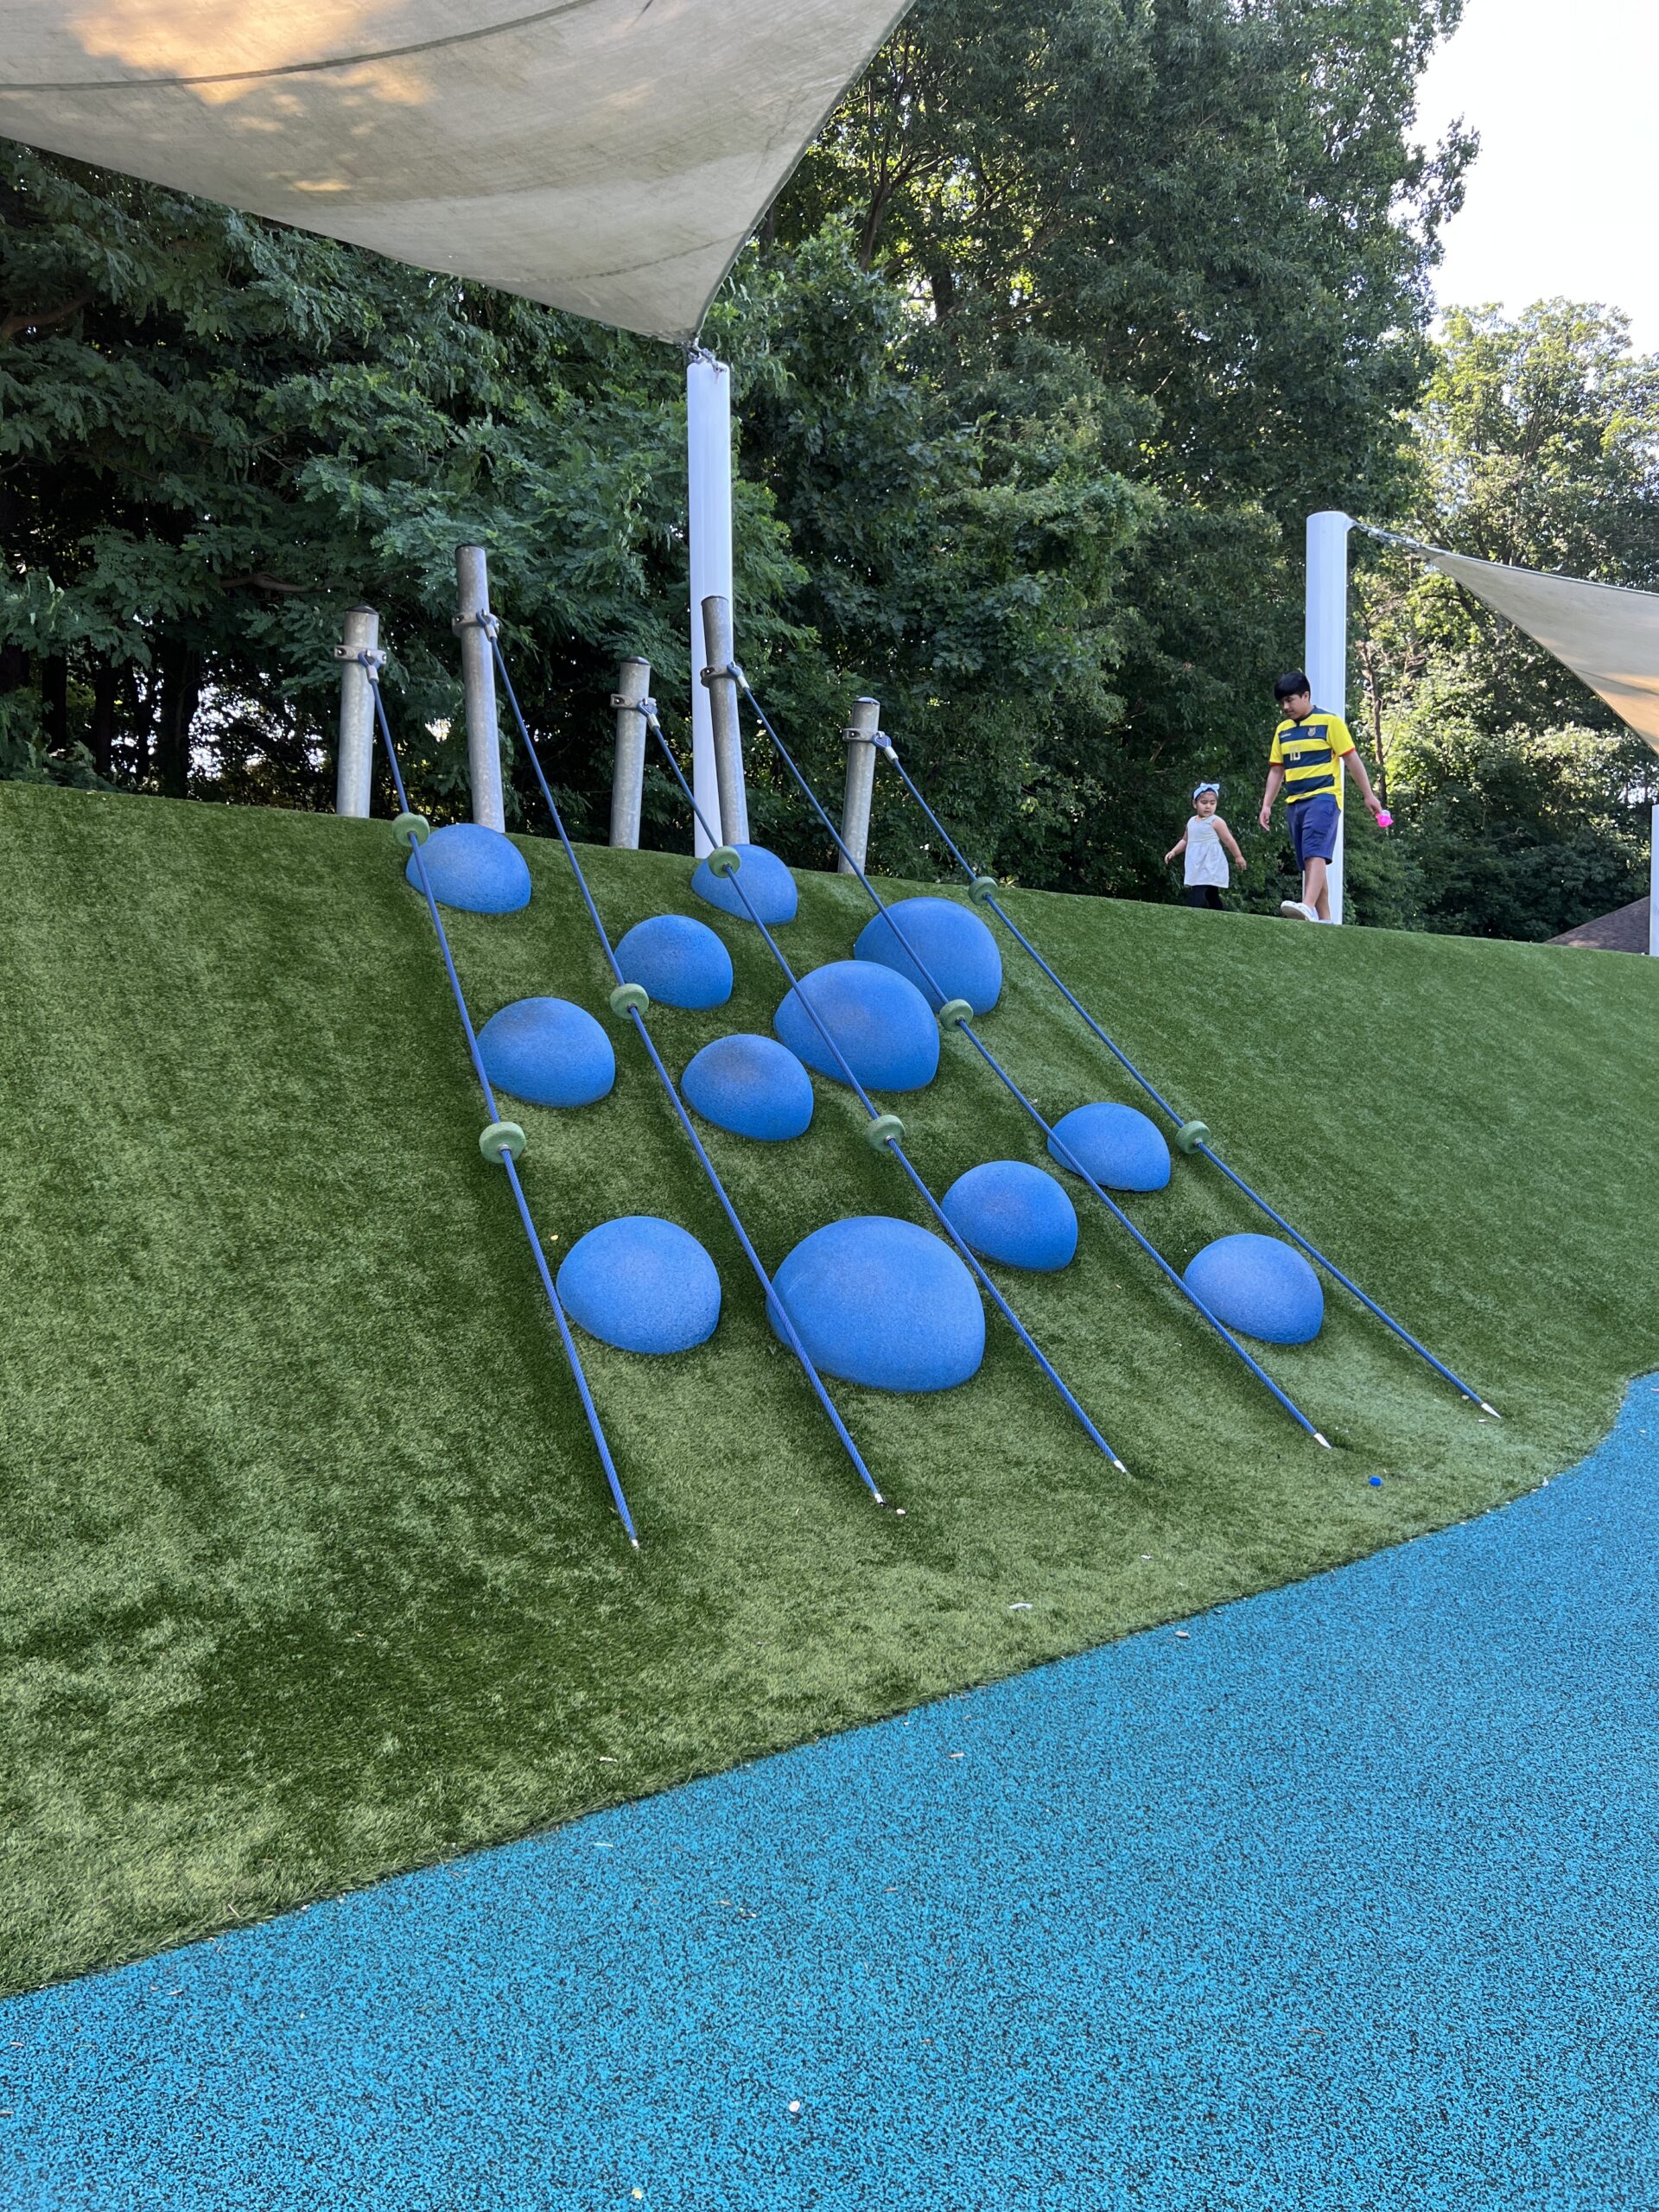 Verona Park Playground in Verona NJ - Features - Hill Wall ropes and blue spheres TALL image